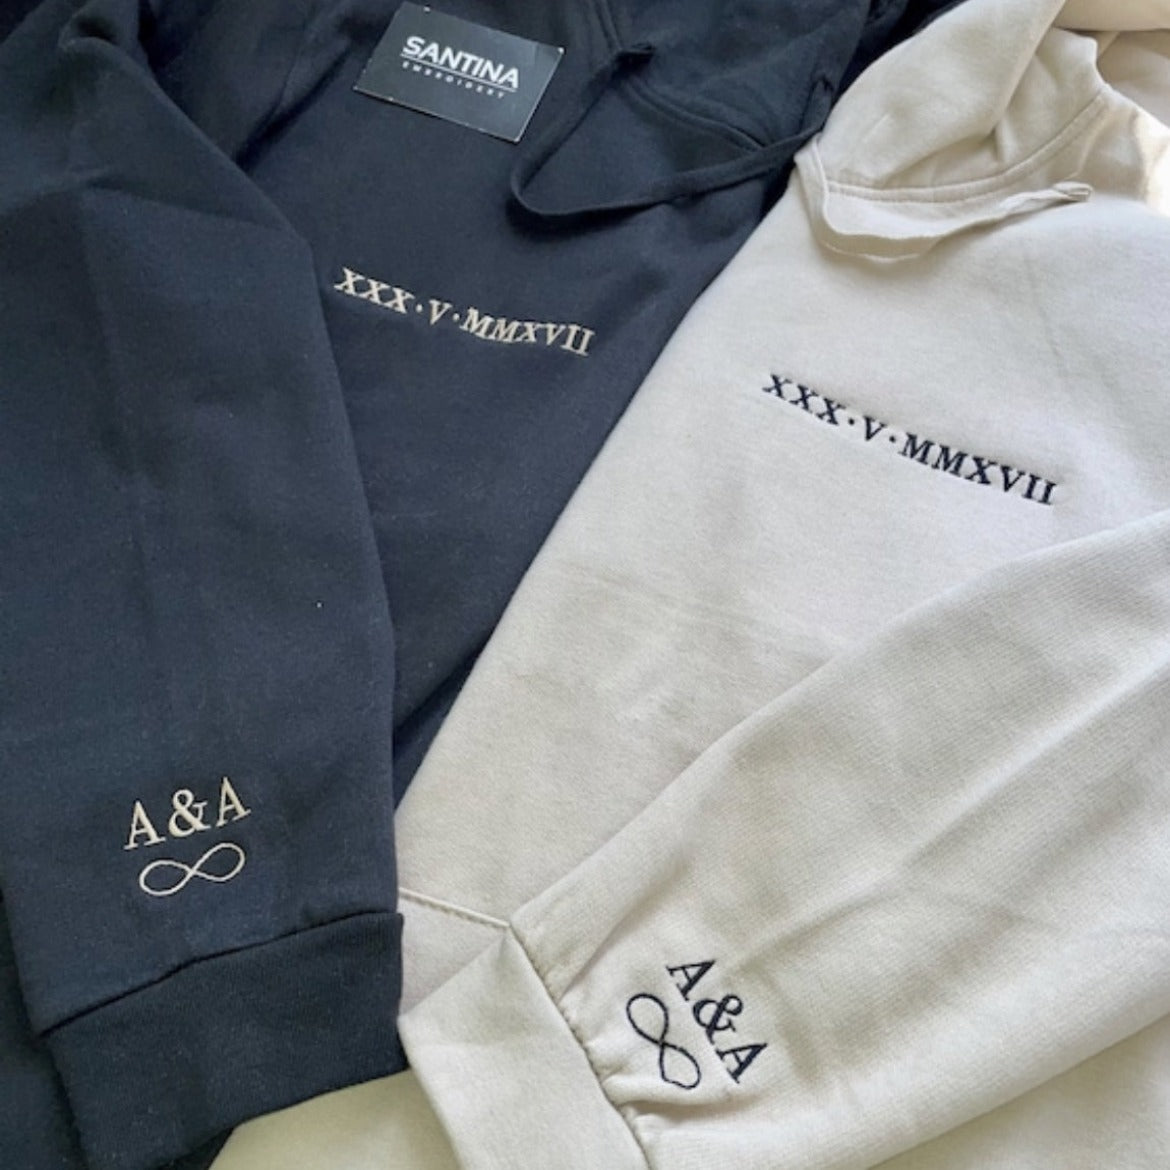 Custom Embroidered Hoodies with Roman Numerals – Santina Embroidery